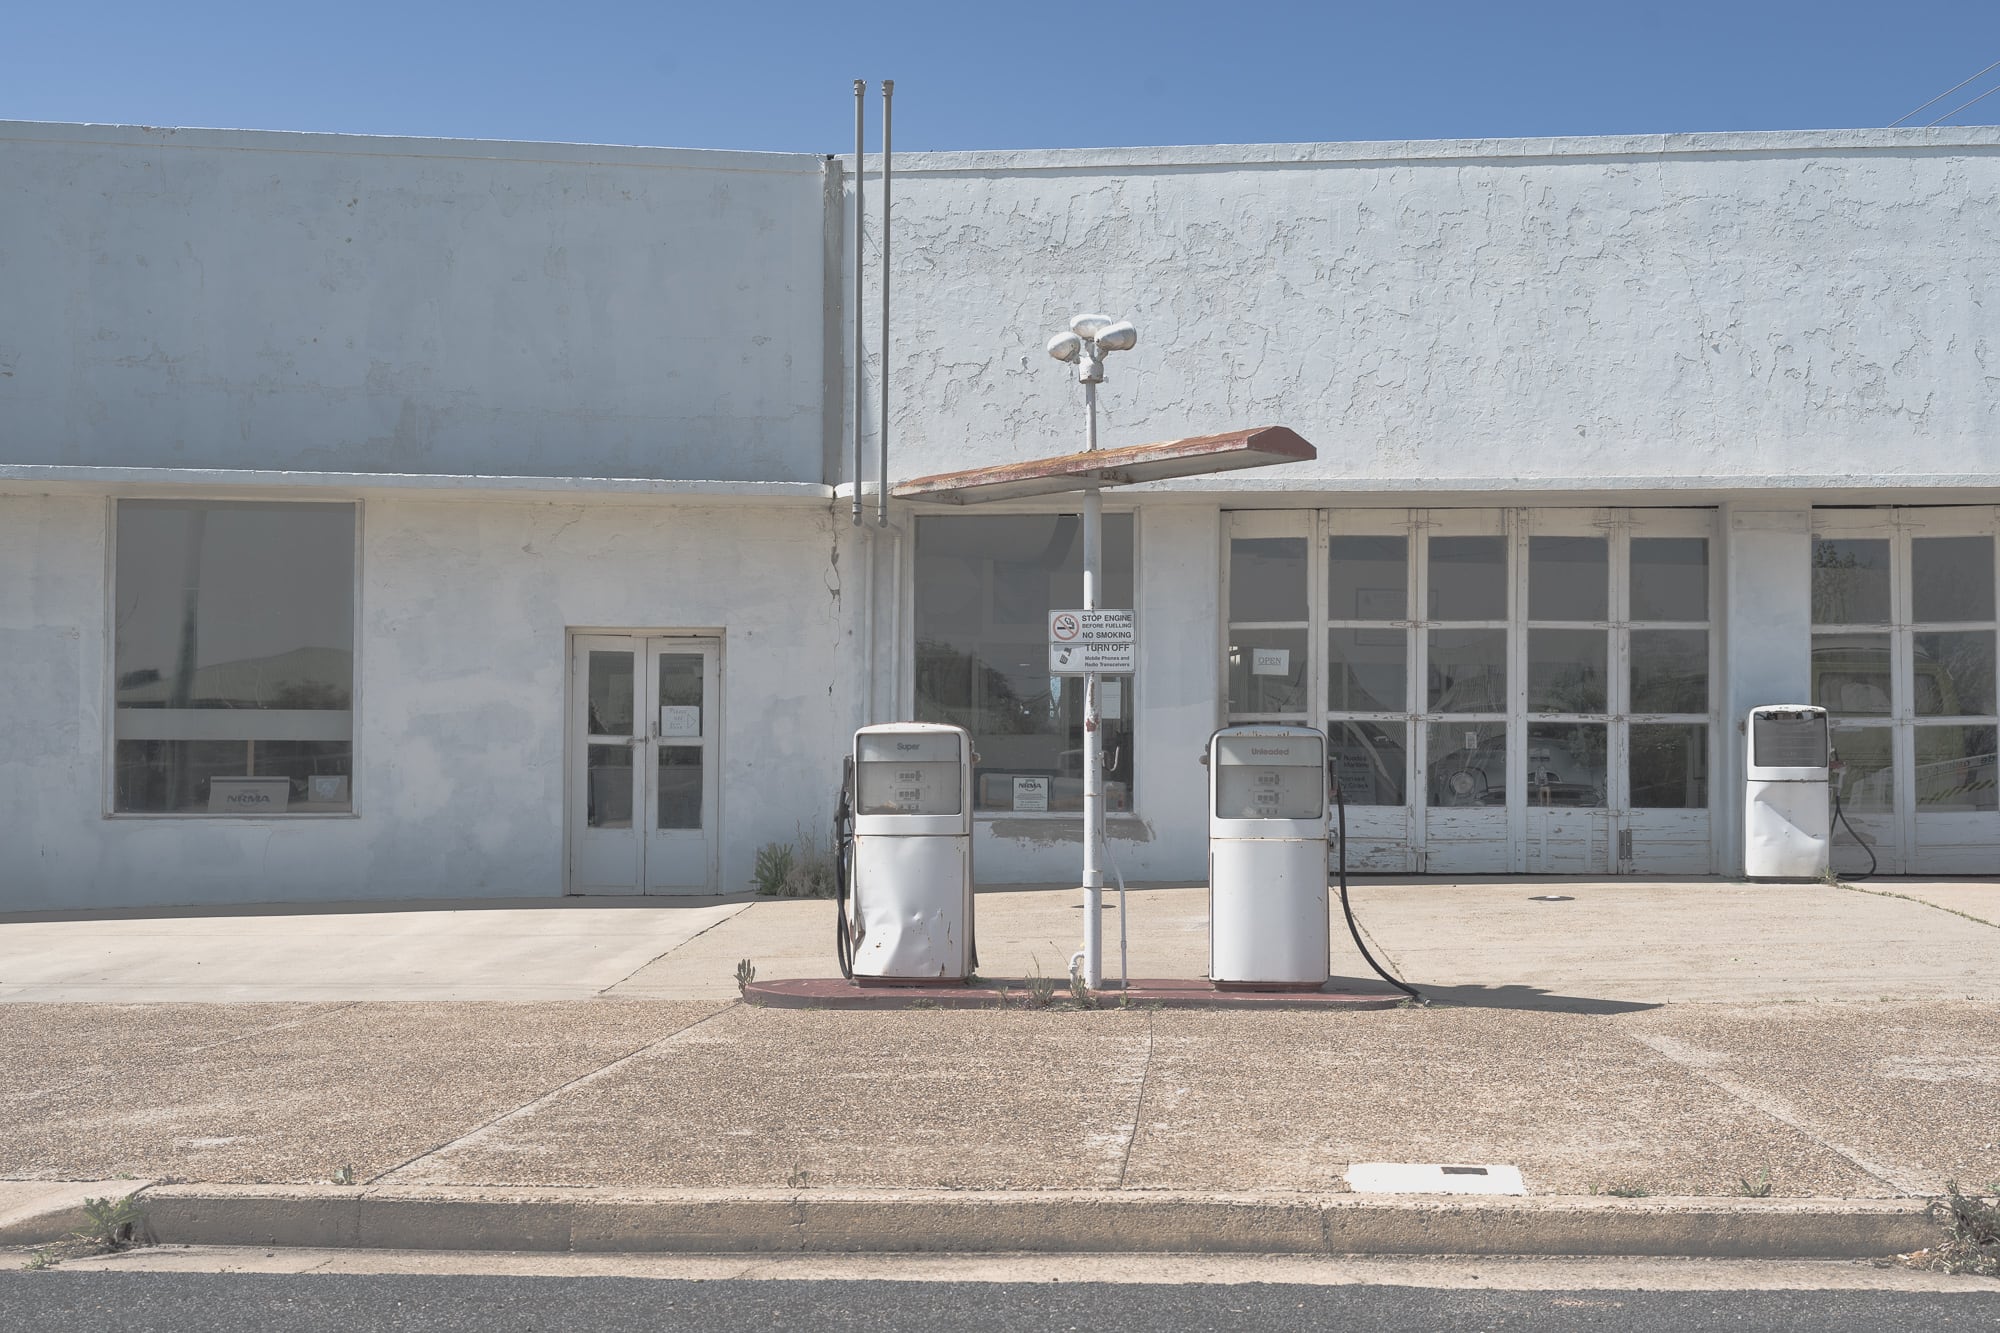 A desolate scene of an abandoned fuel station with obsolete pumps in Cowra, NSW, under a broad daylight sky.